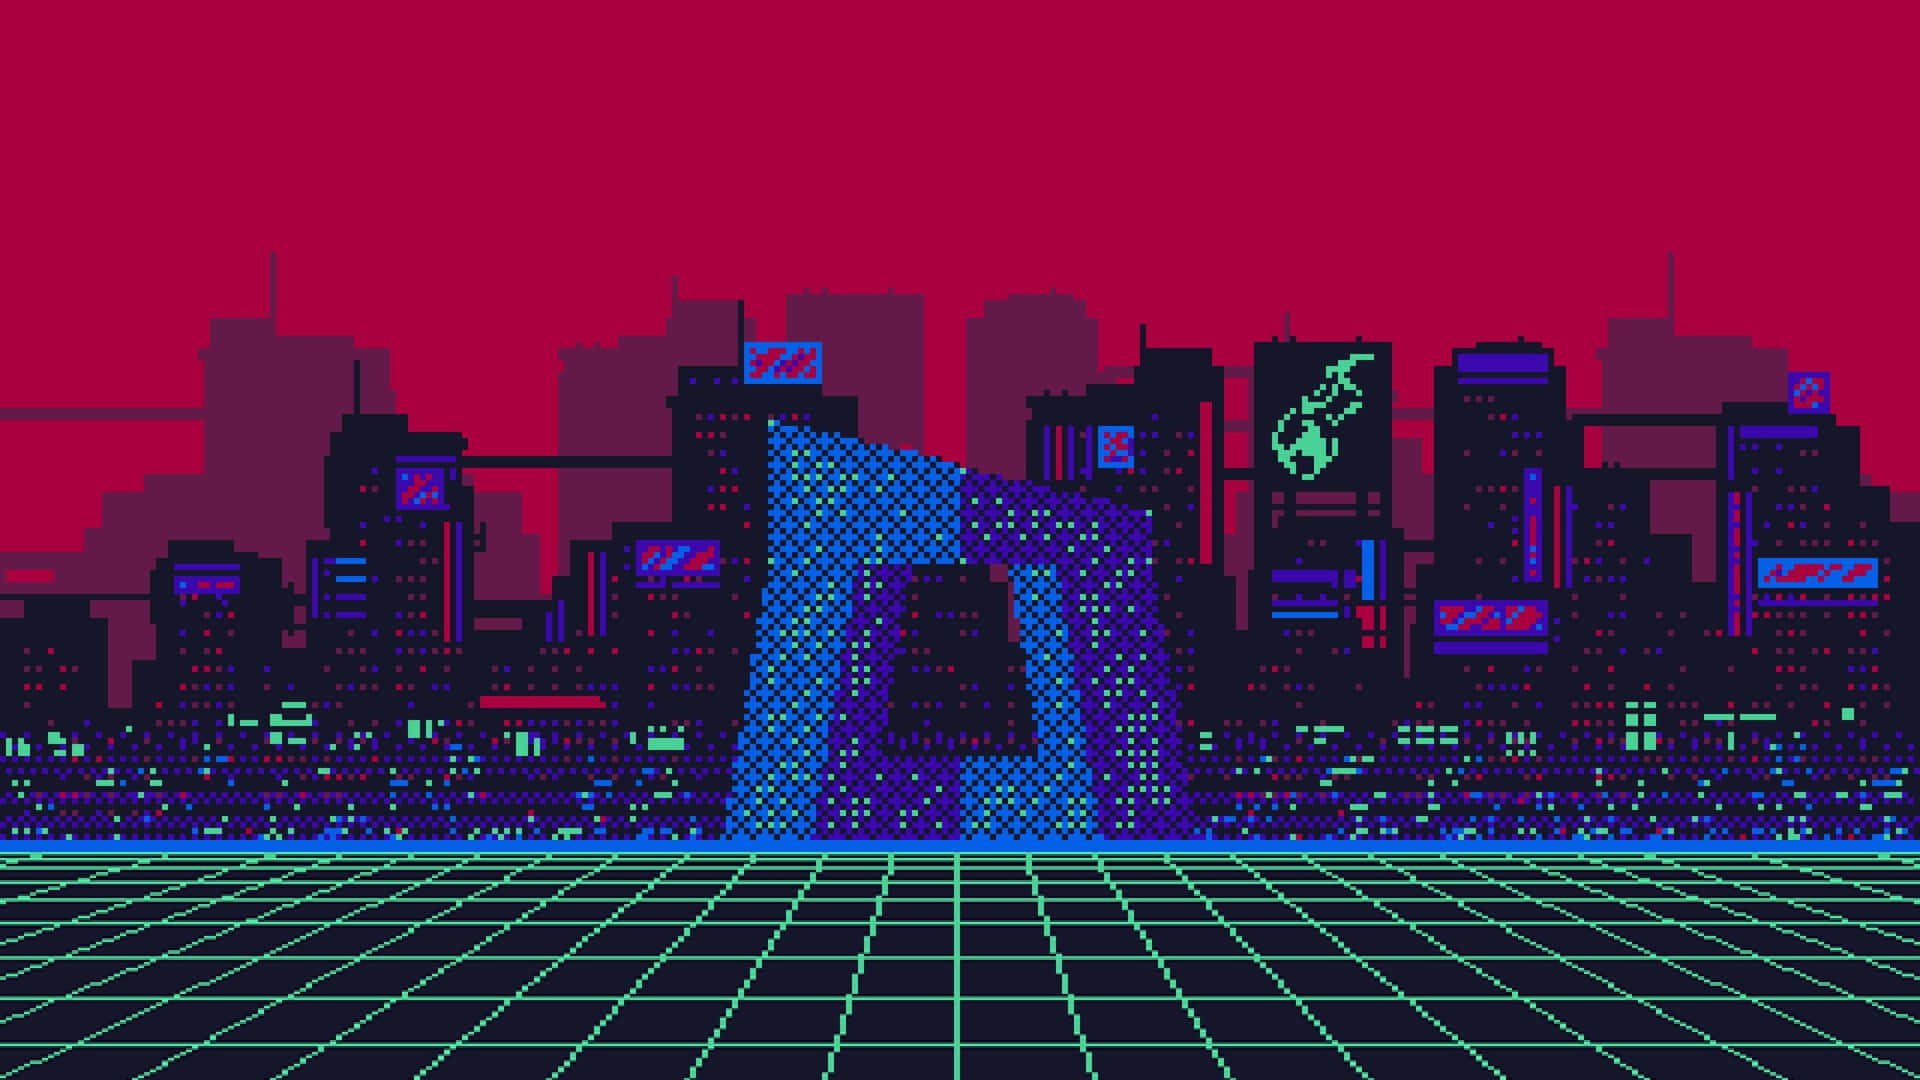 “welcome To The Future Of Cyberpunk Pixel Art”